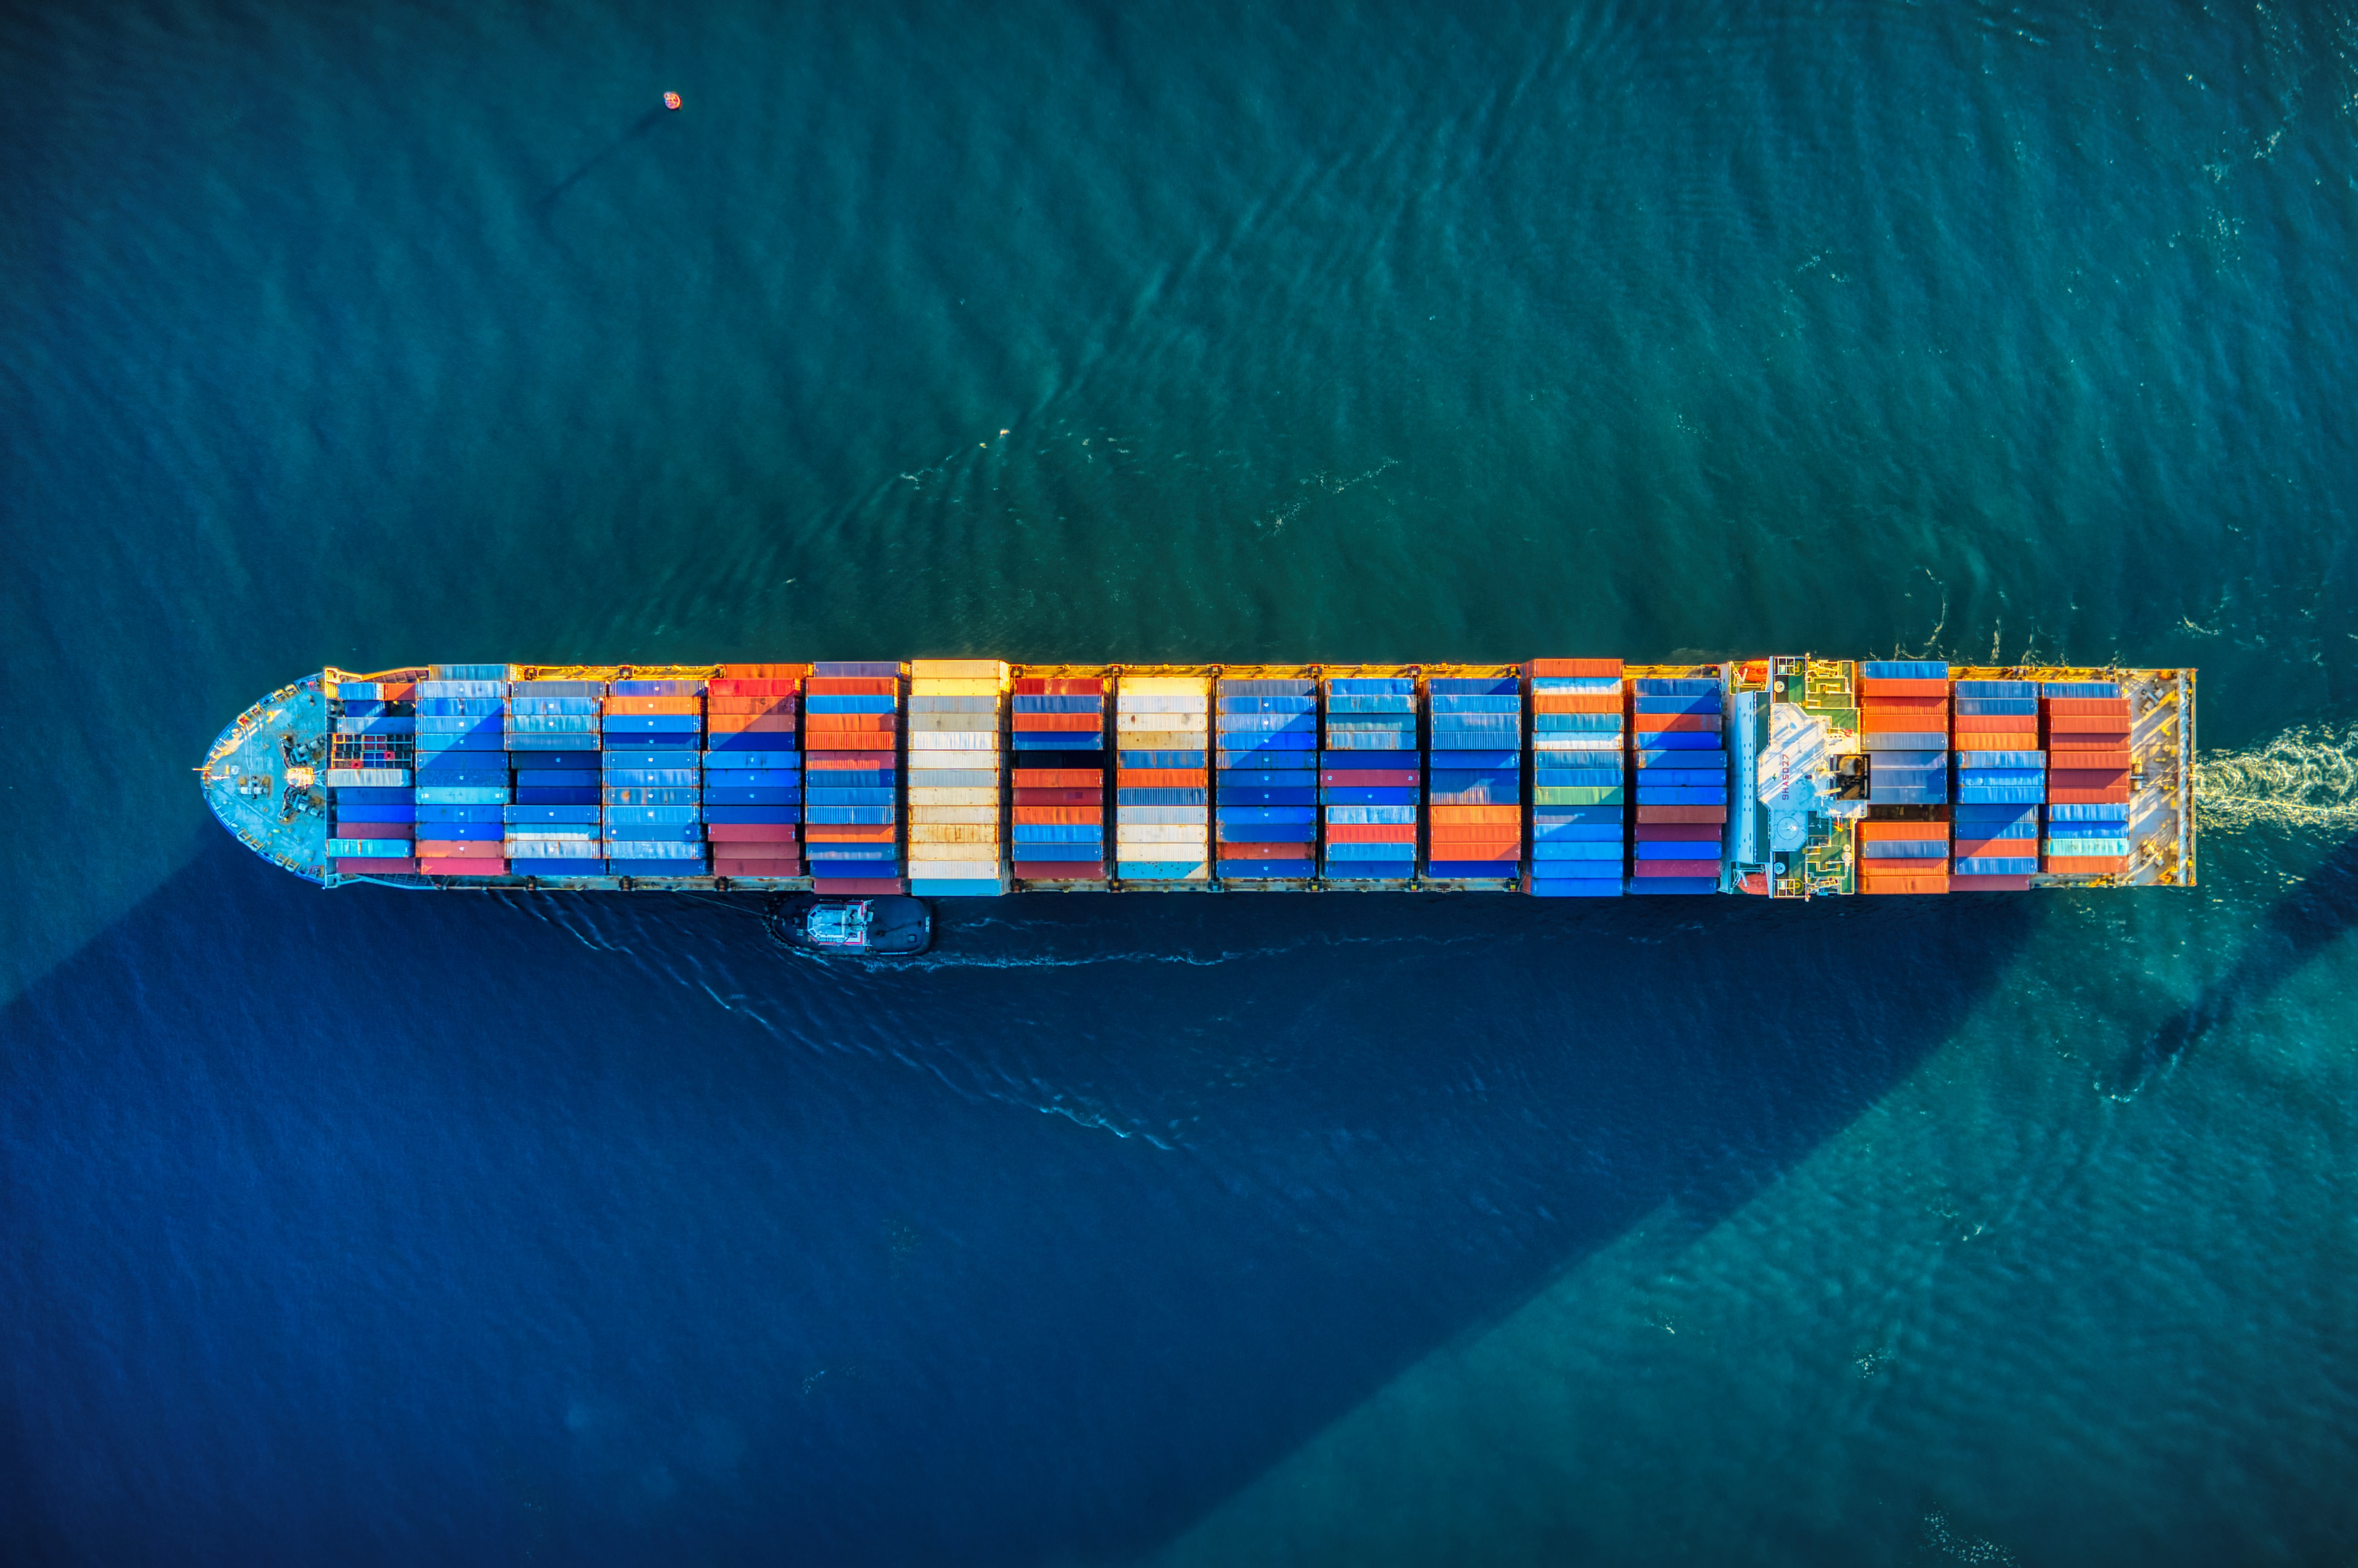 Why Maximising The Number Of Cars And Return Racks Is Important In Containerised Shipping